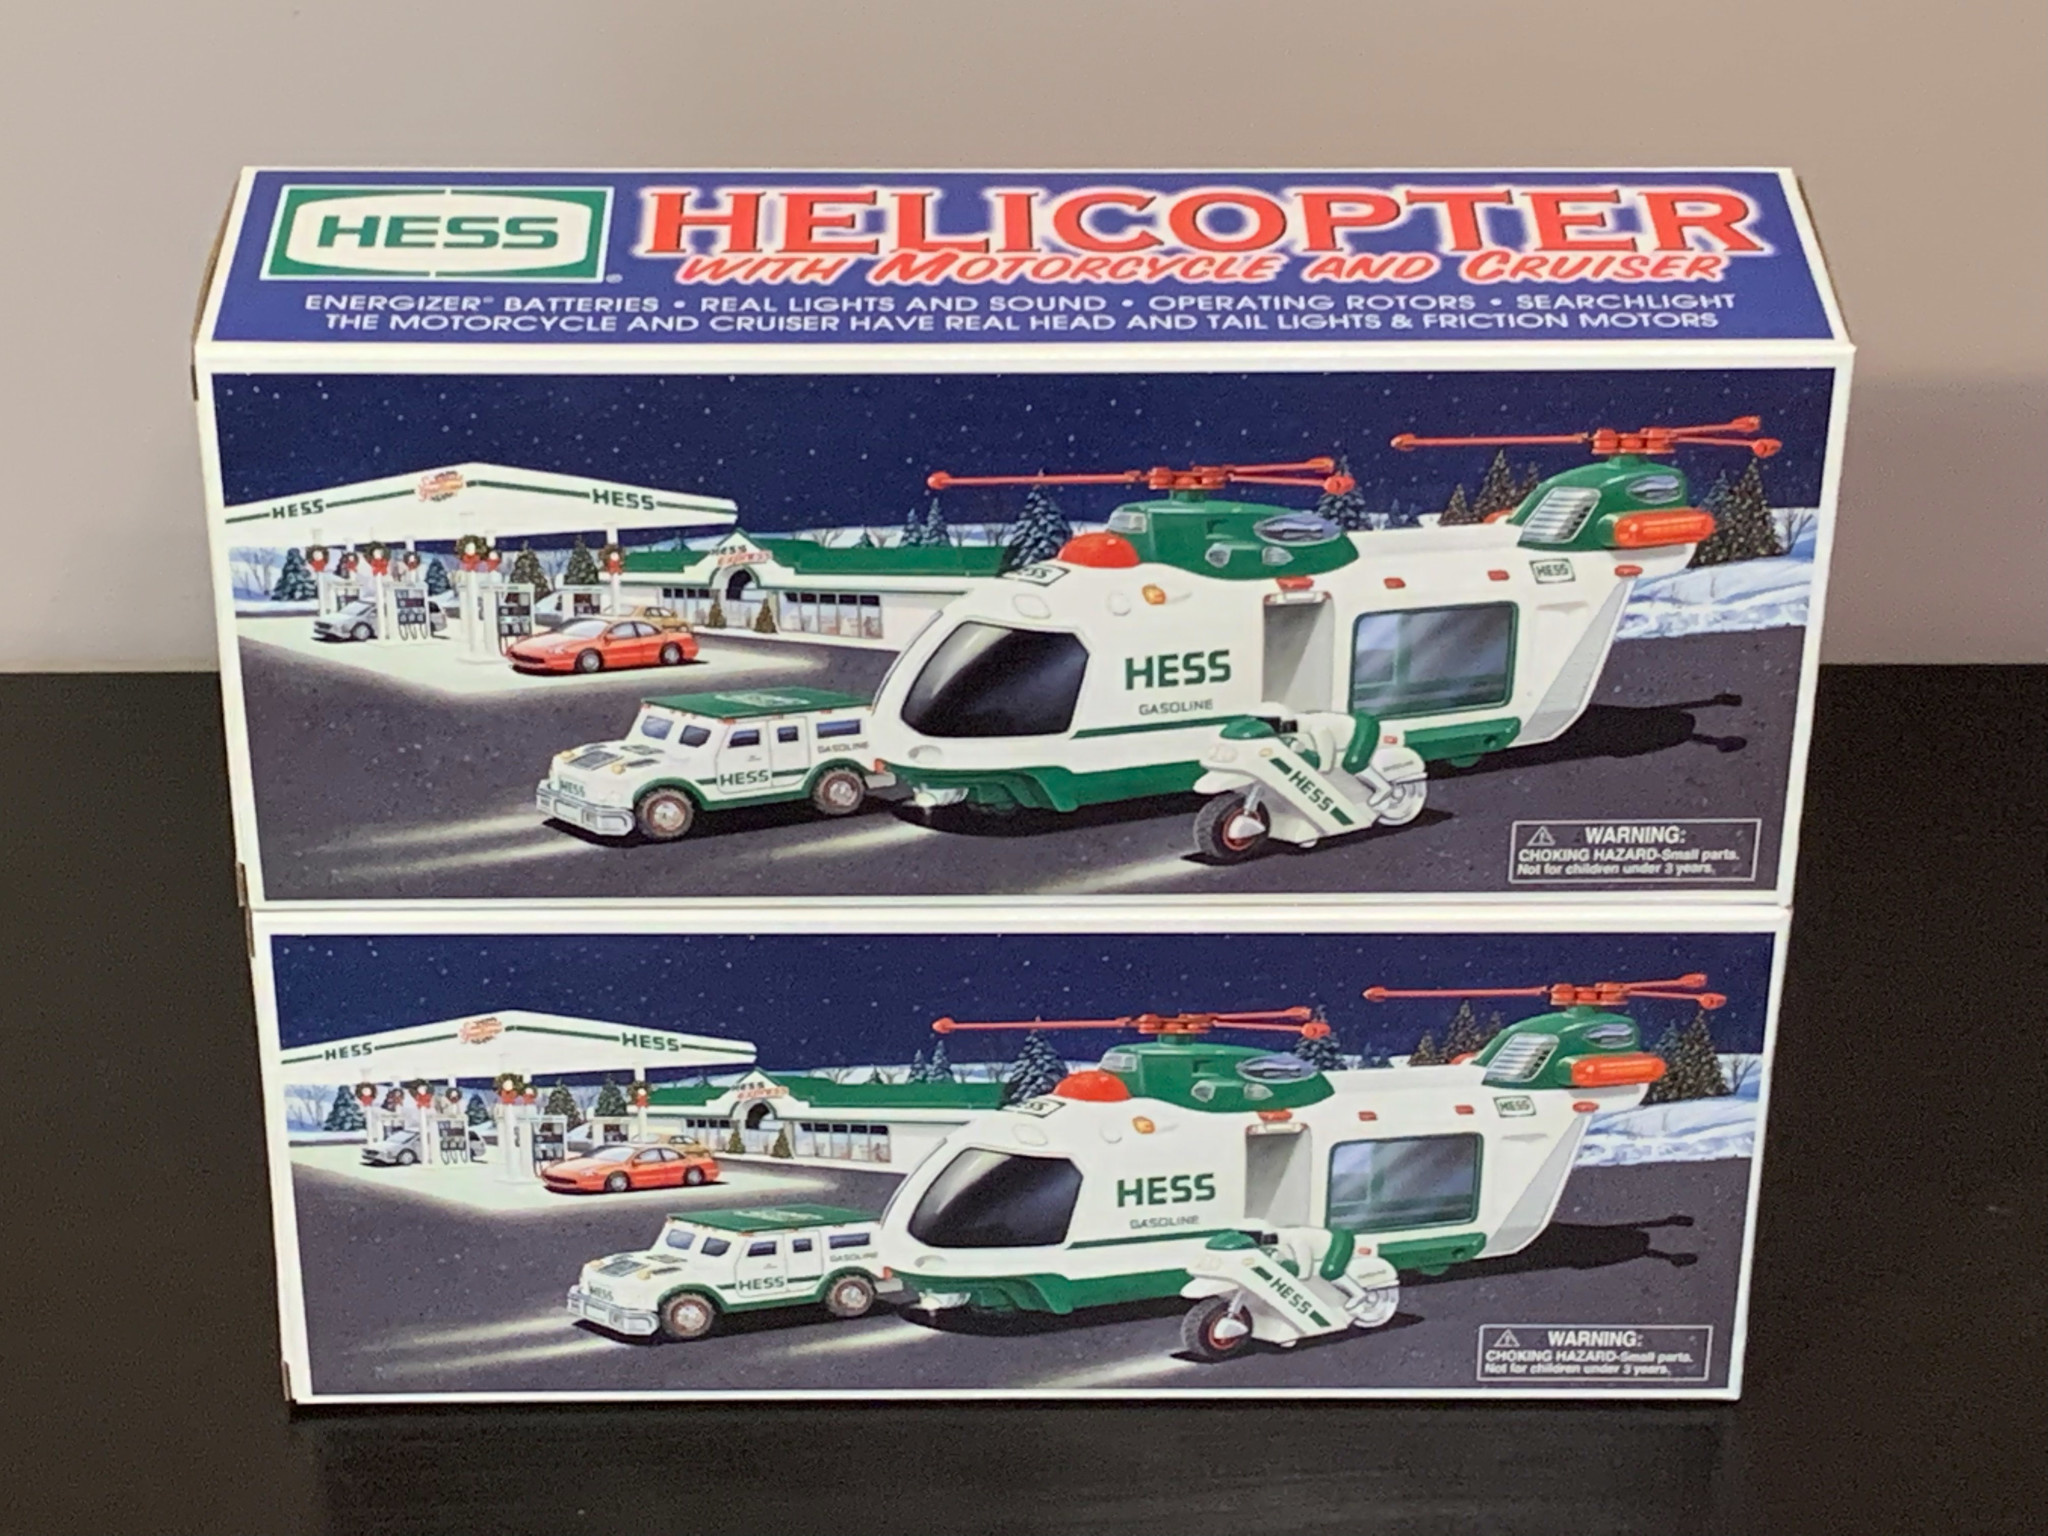 HESS 2001 Hess Helicopter with Motorcycle and Cruiser